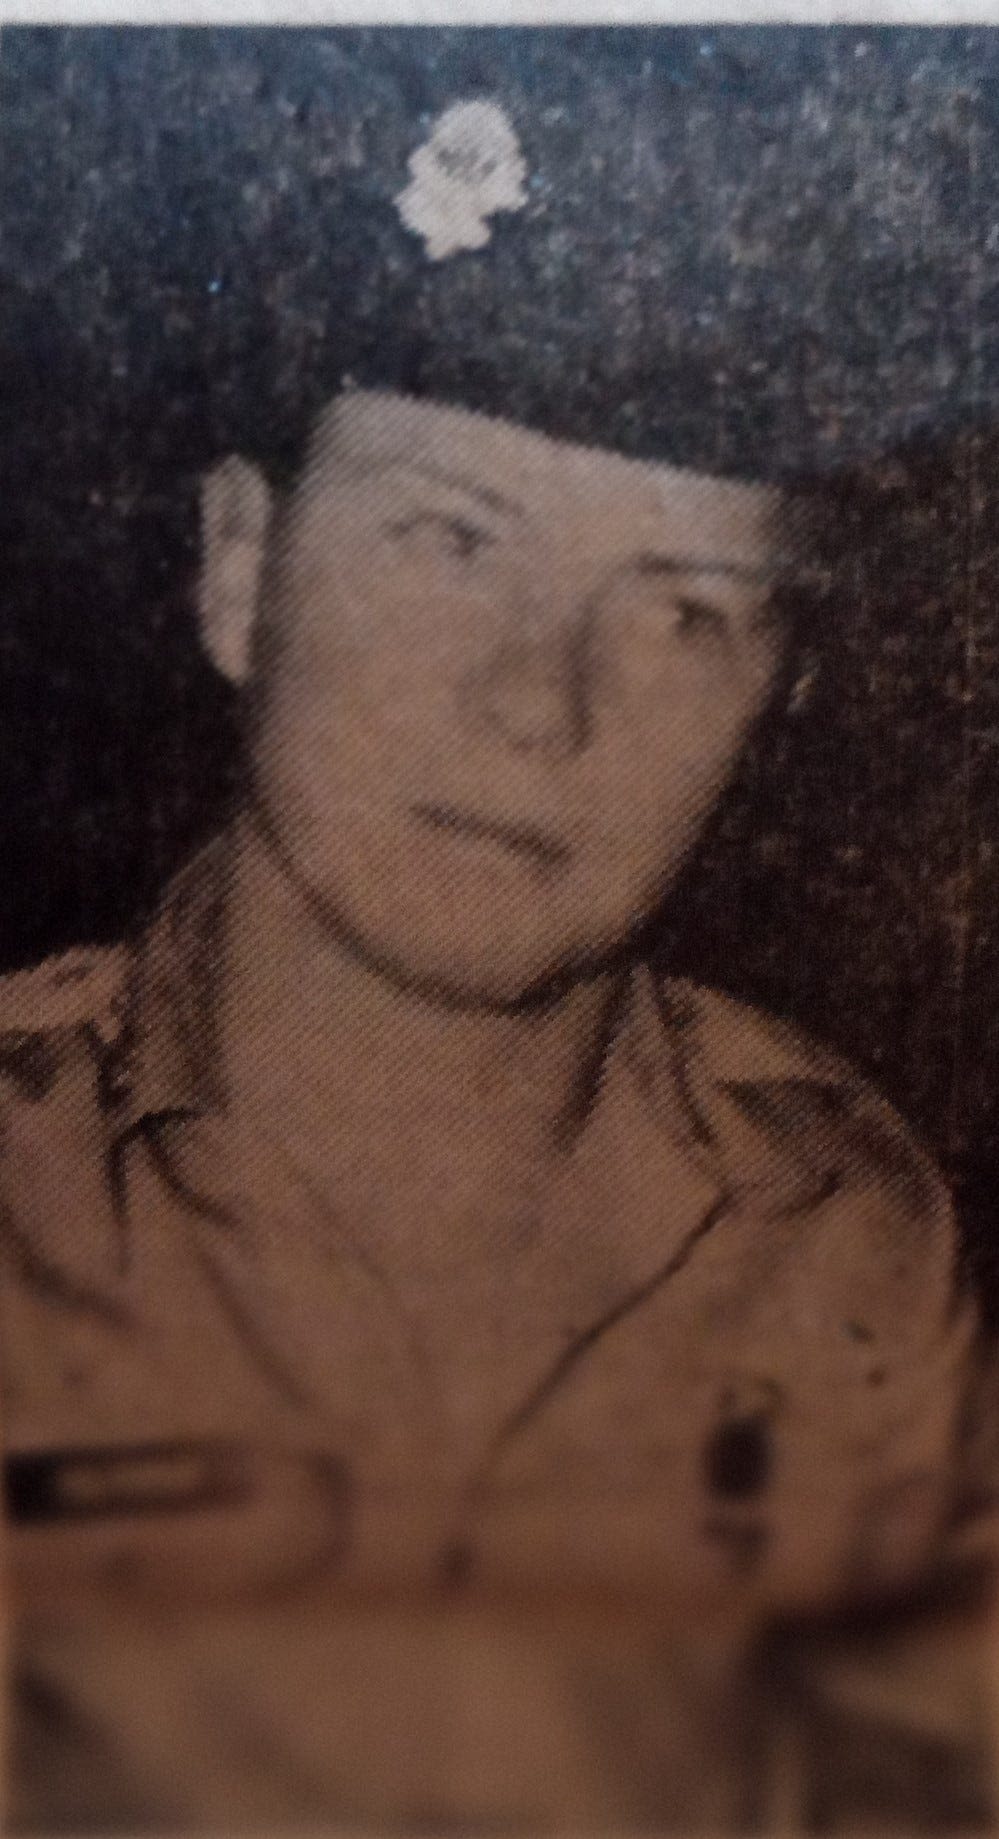 5 served in Vietnam, 1 came home: Tallahassee resident, vet remembers '66 classmates